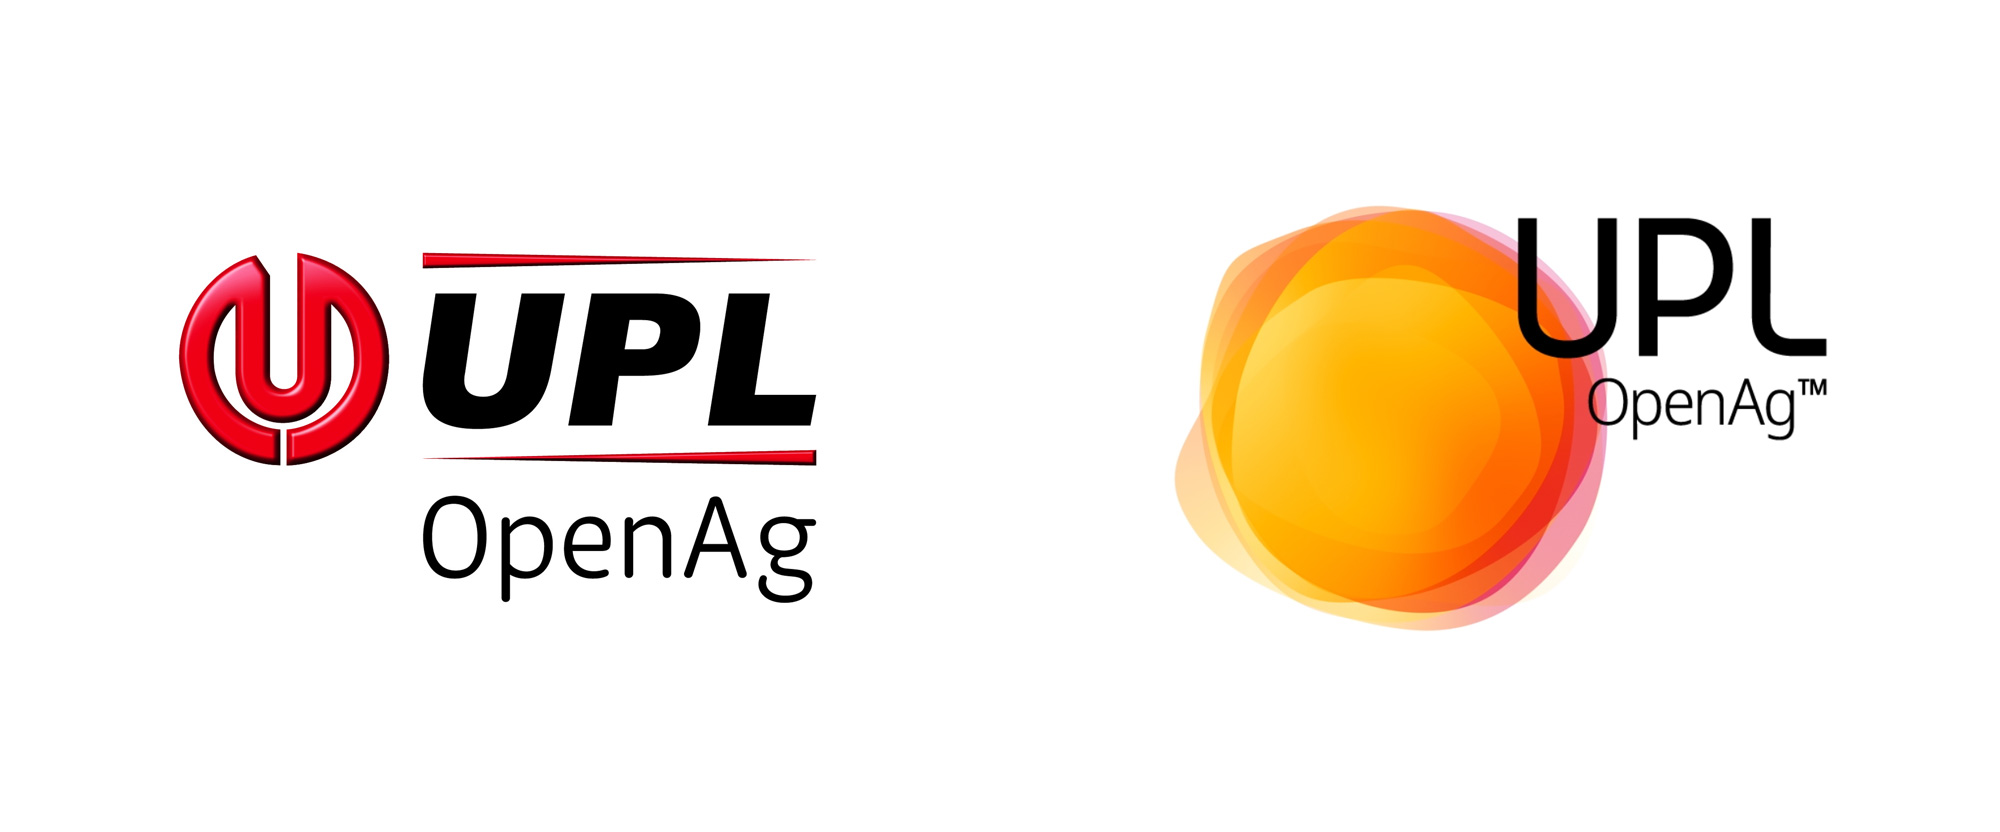 New Logo and Identity for UPL OpenAg by Venturethree